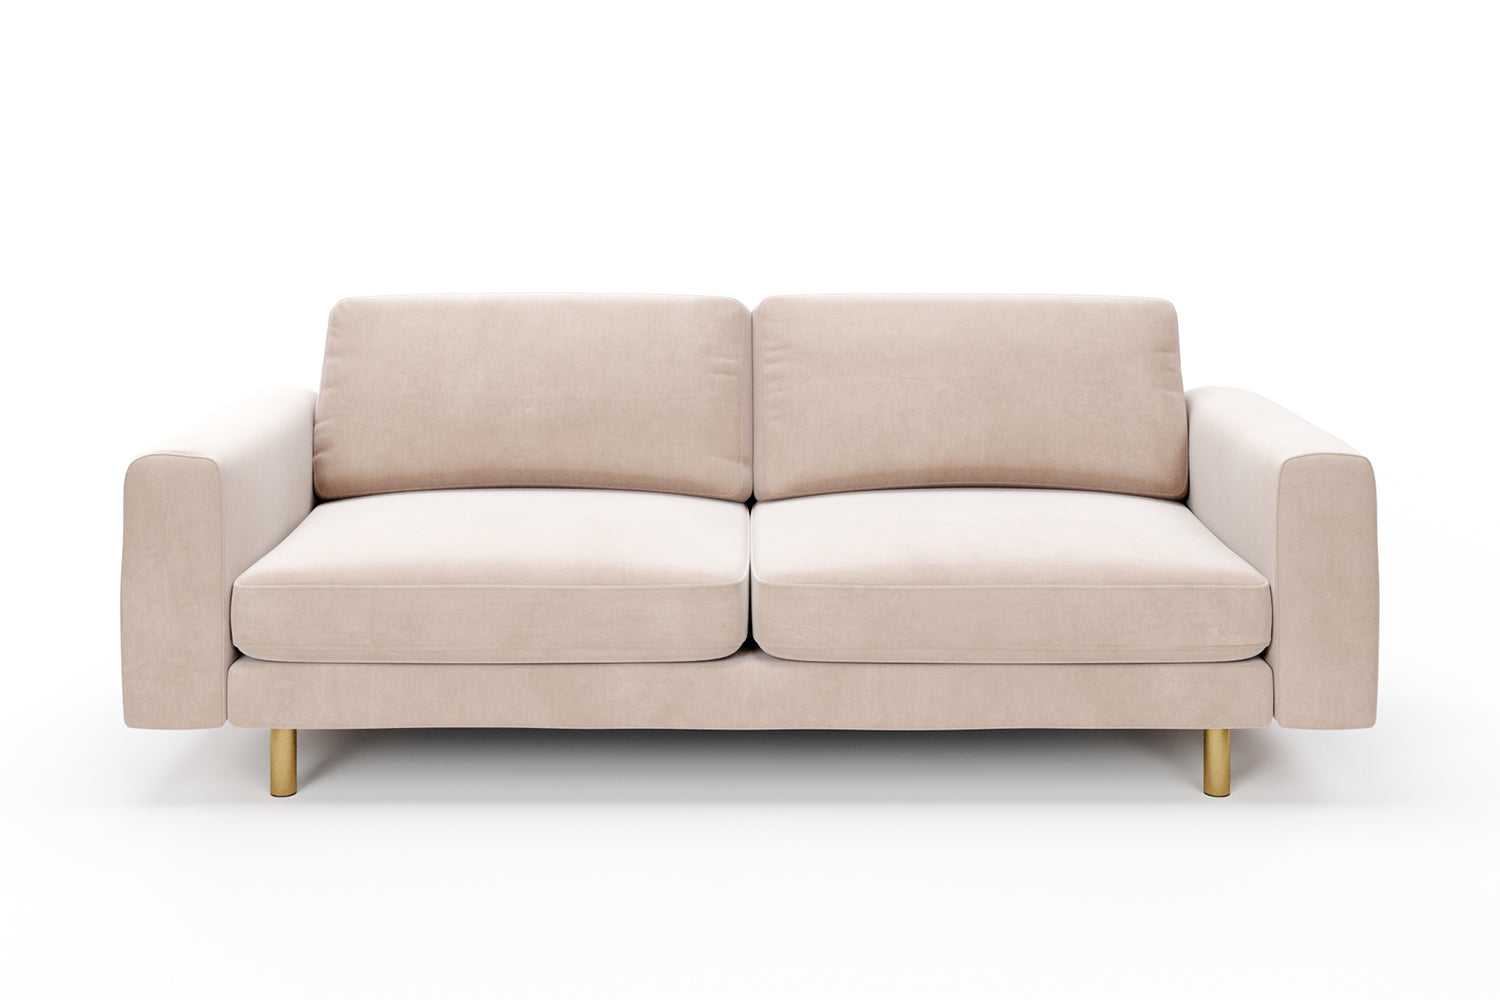 SNUG | The Big Chill 3 Seater Sofa in Taupe variant_40414879055920